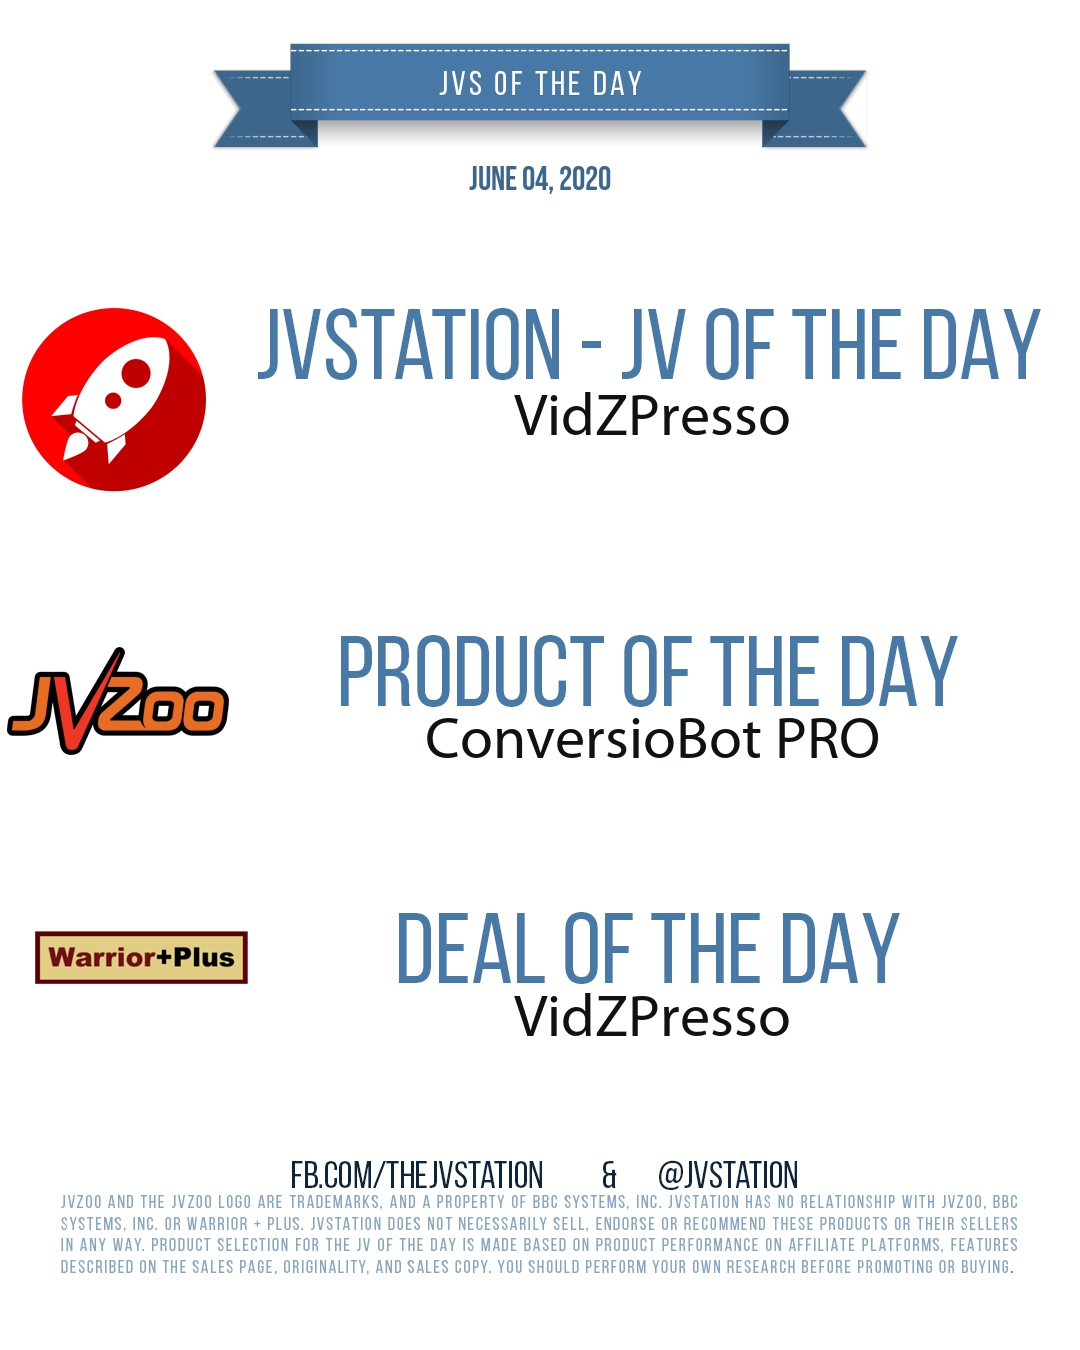 JVs of the day - June 04, 2020